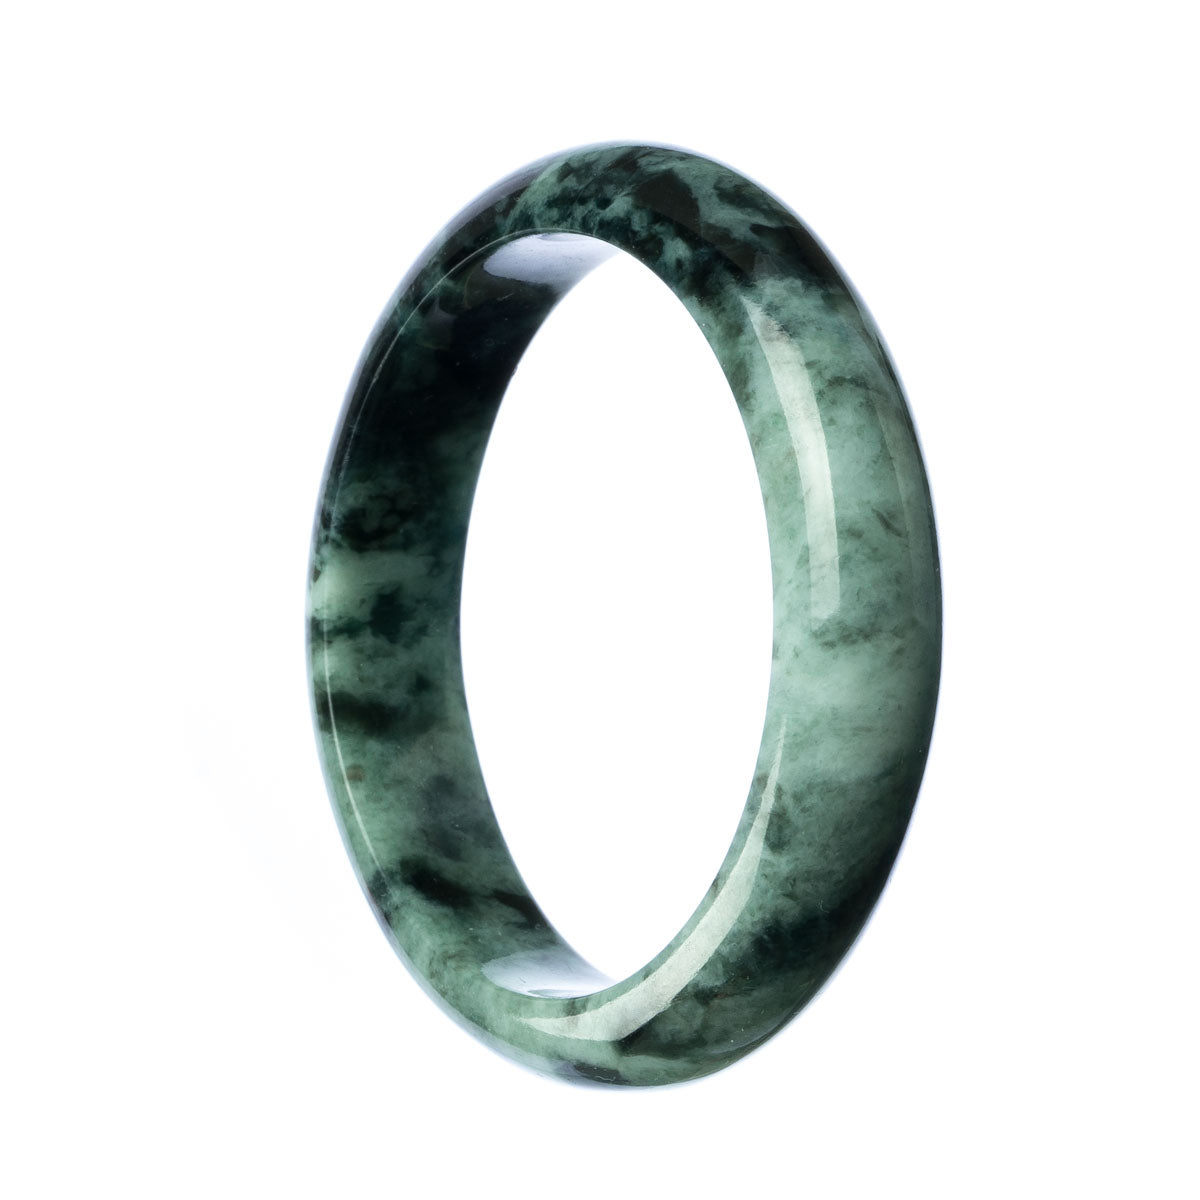 A beautiful half moon-shaped green jadeite jade bangle, Grade A quality, with a diameter of 59mm, sold by MAYS™.